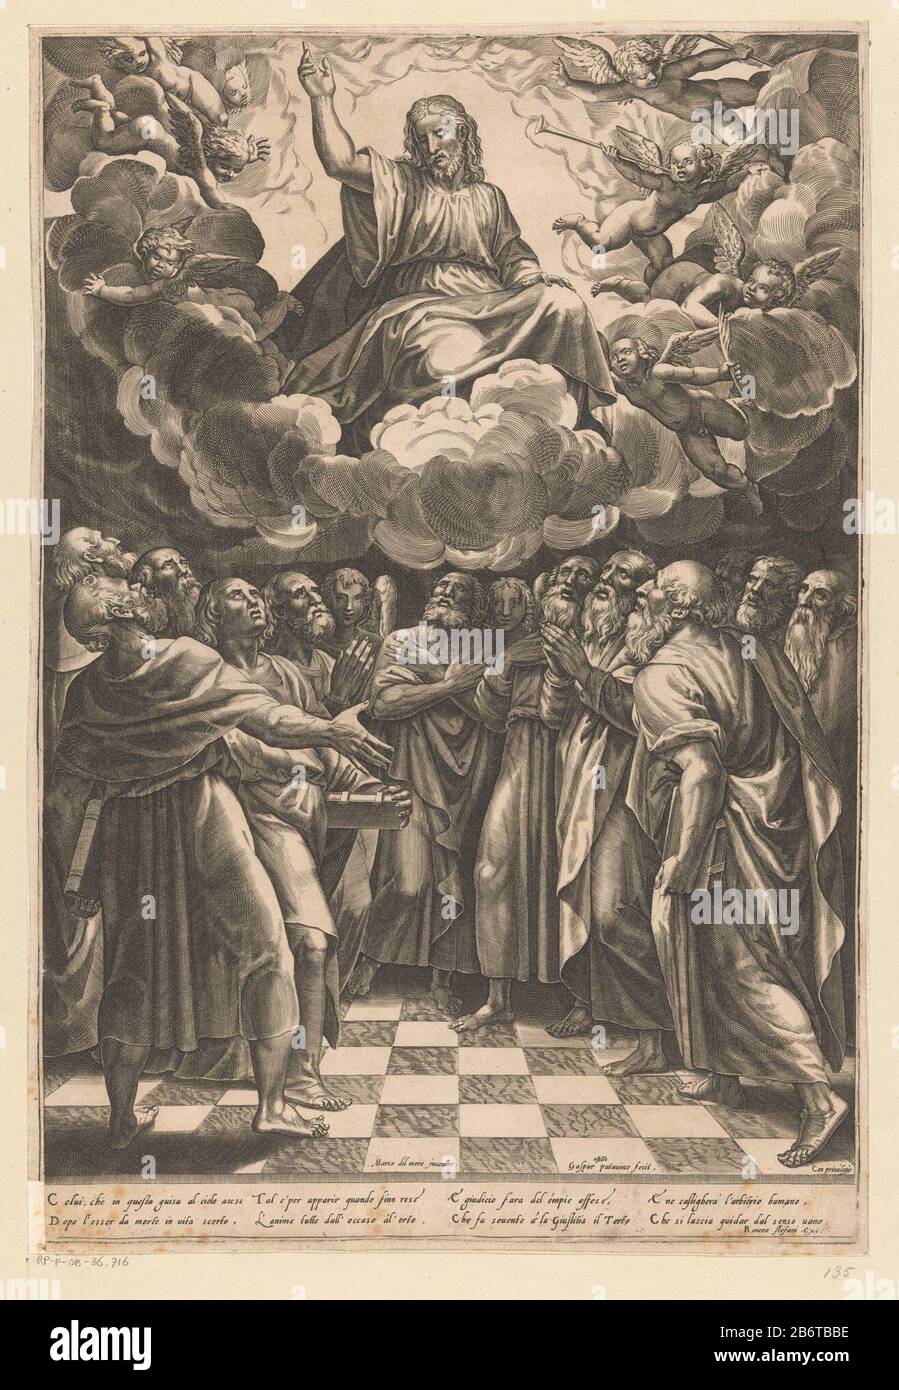 Hemelvaart van Christus The Ascension of Christ. Christ is carried by putti  on clouds in the sky. Below him, in a room are the two apostles and angels.  Italian verse in ondermarge.